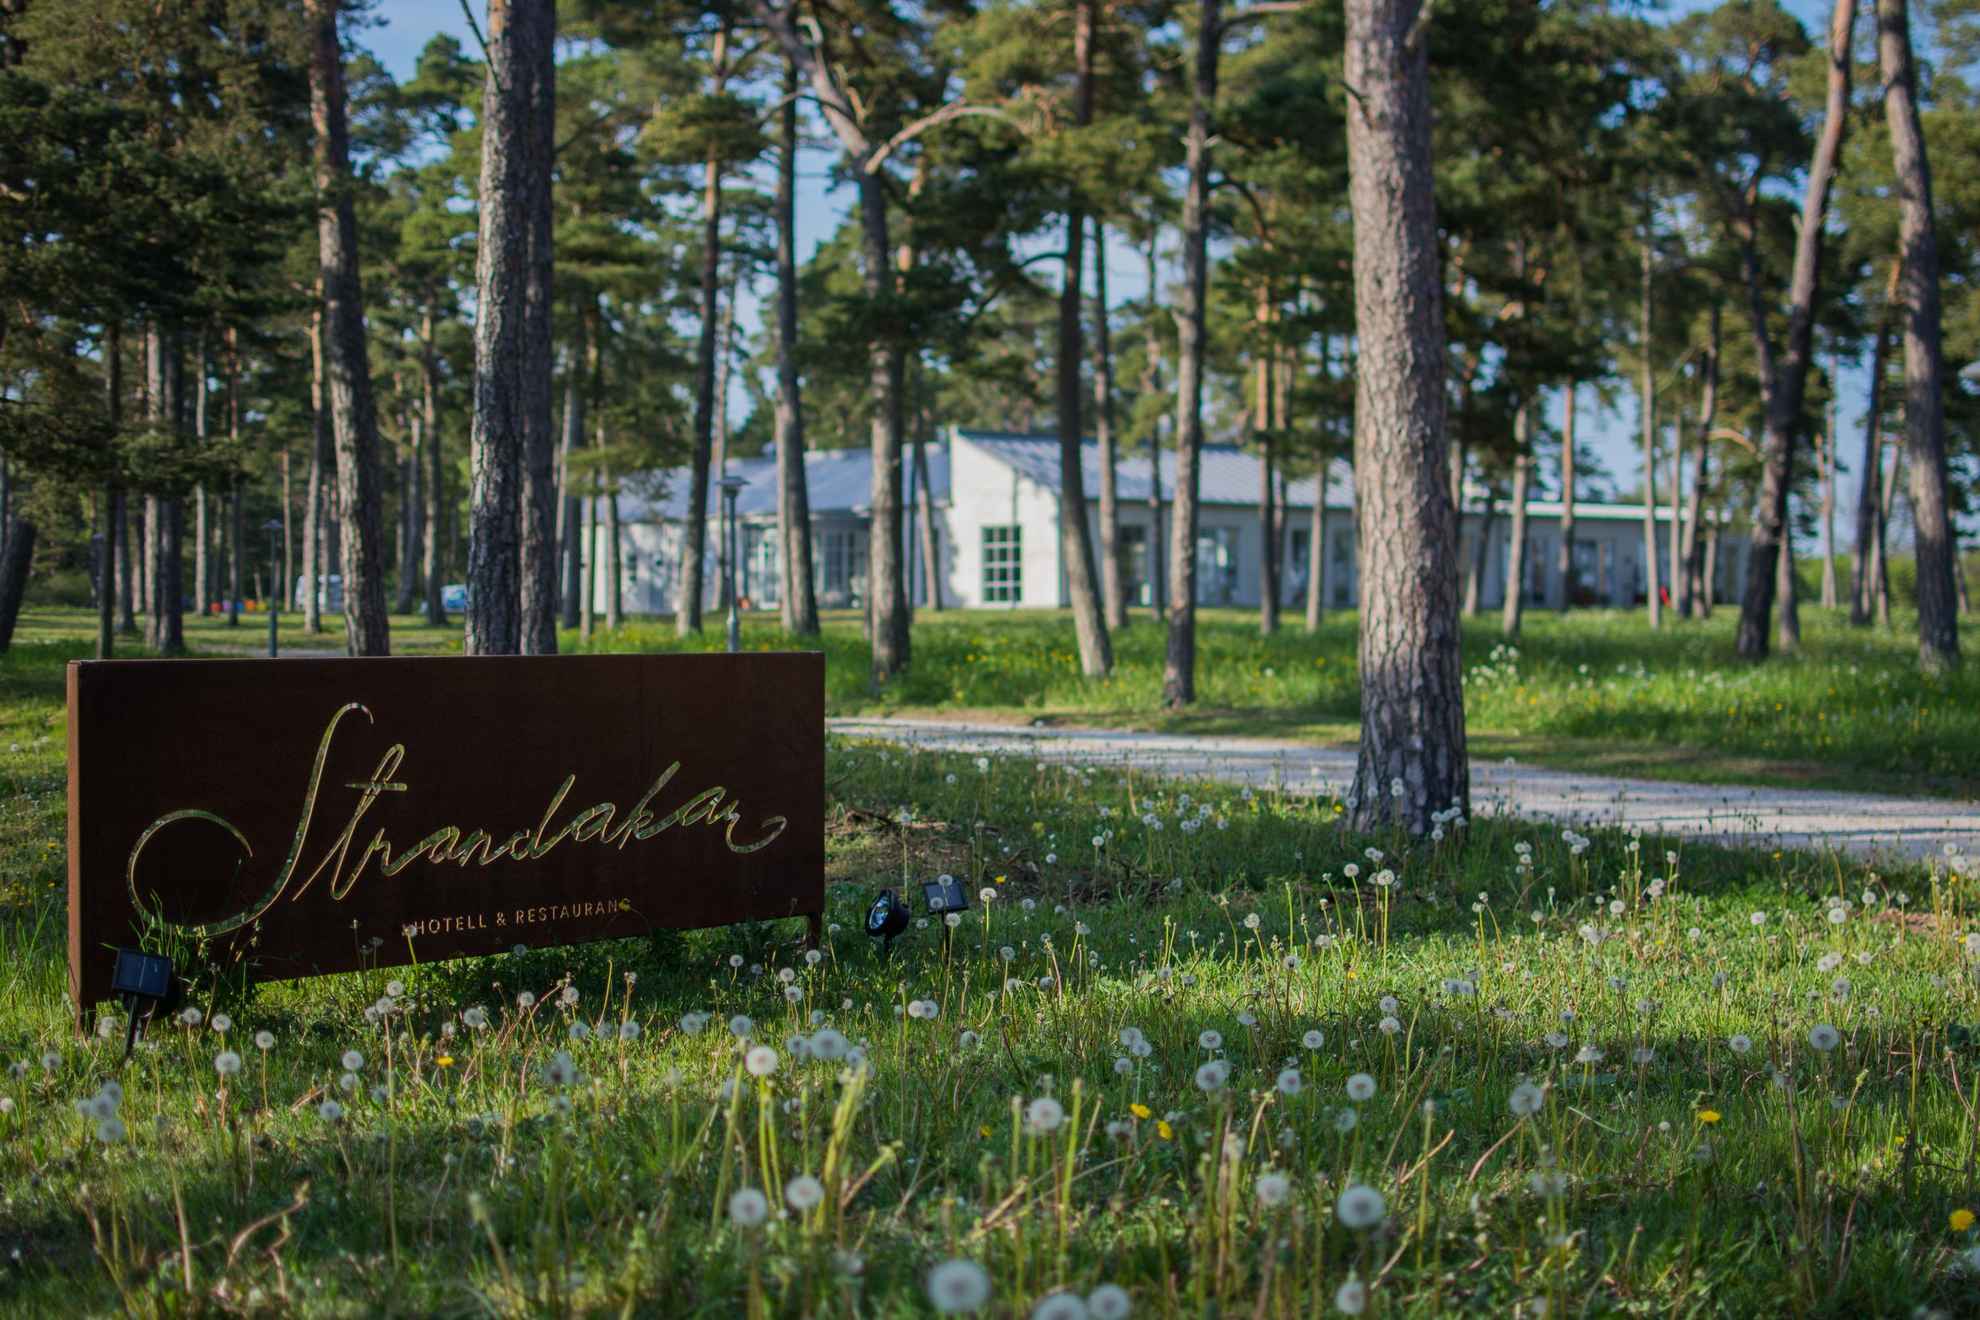 A sign that says Standakar hotel & restaurant is seen among bloomed dandelions and pine trees. A white building in the background behind the trees.